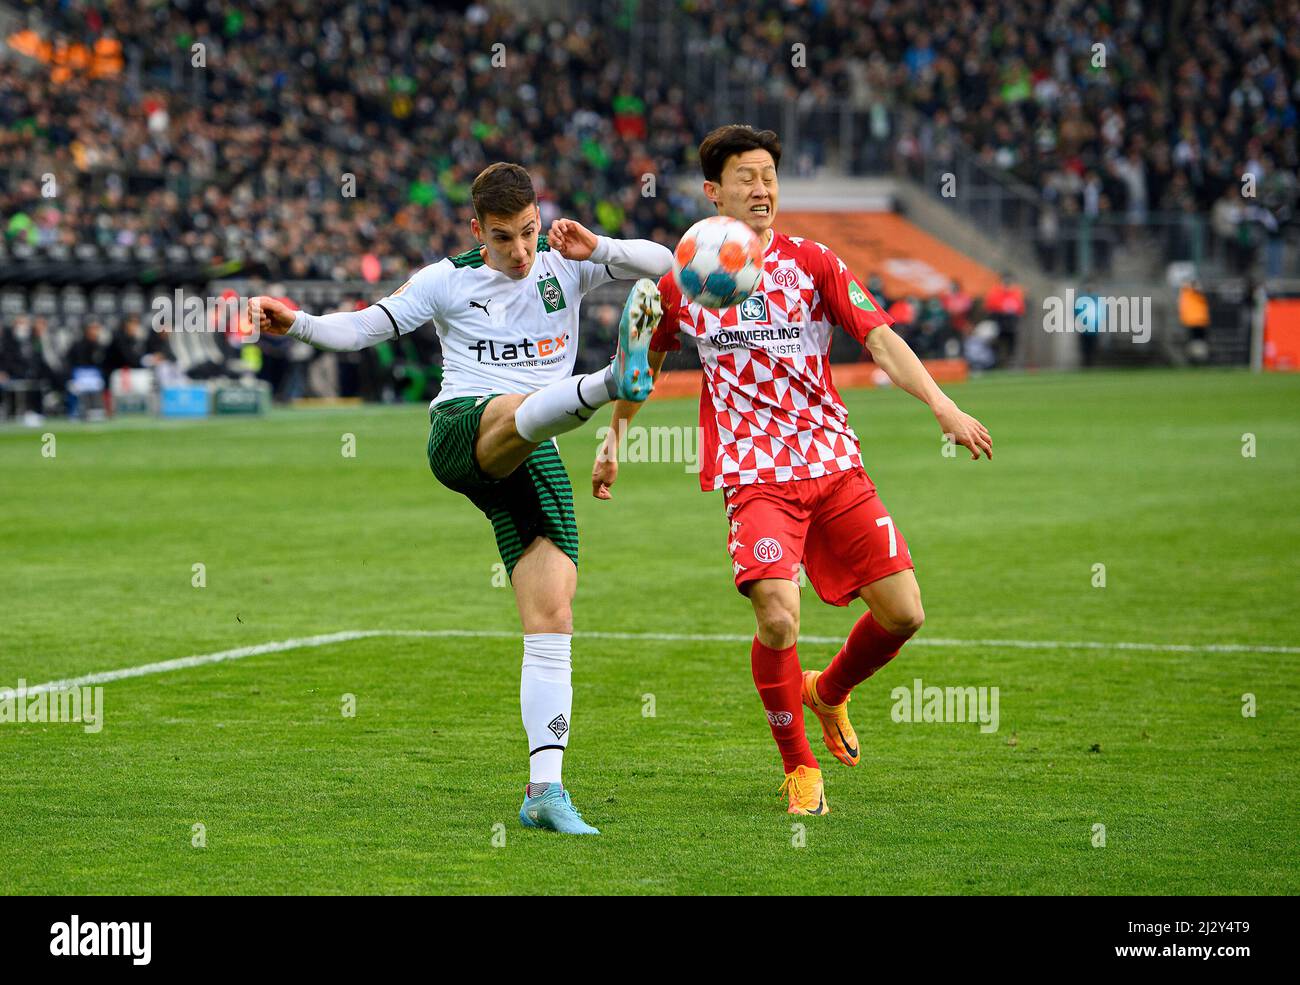 Conor NOSS l. (MG) in duels versus Jae-Sung LEE (MZ), action, soccer 1st Bundesliga, 28th matchday, Borussia Monchengladbach (MG) - FSV FSV FSV Mainz 05 (MZ) 1: 1, on April 3rd, 2022 in Borussia Monchengladbach/Germany. #DFL regulations prohibit any use of photographs as image sequences and/or quasi-video # Â Stock Photo